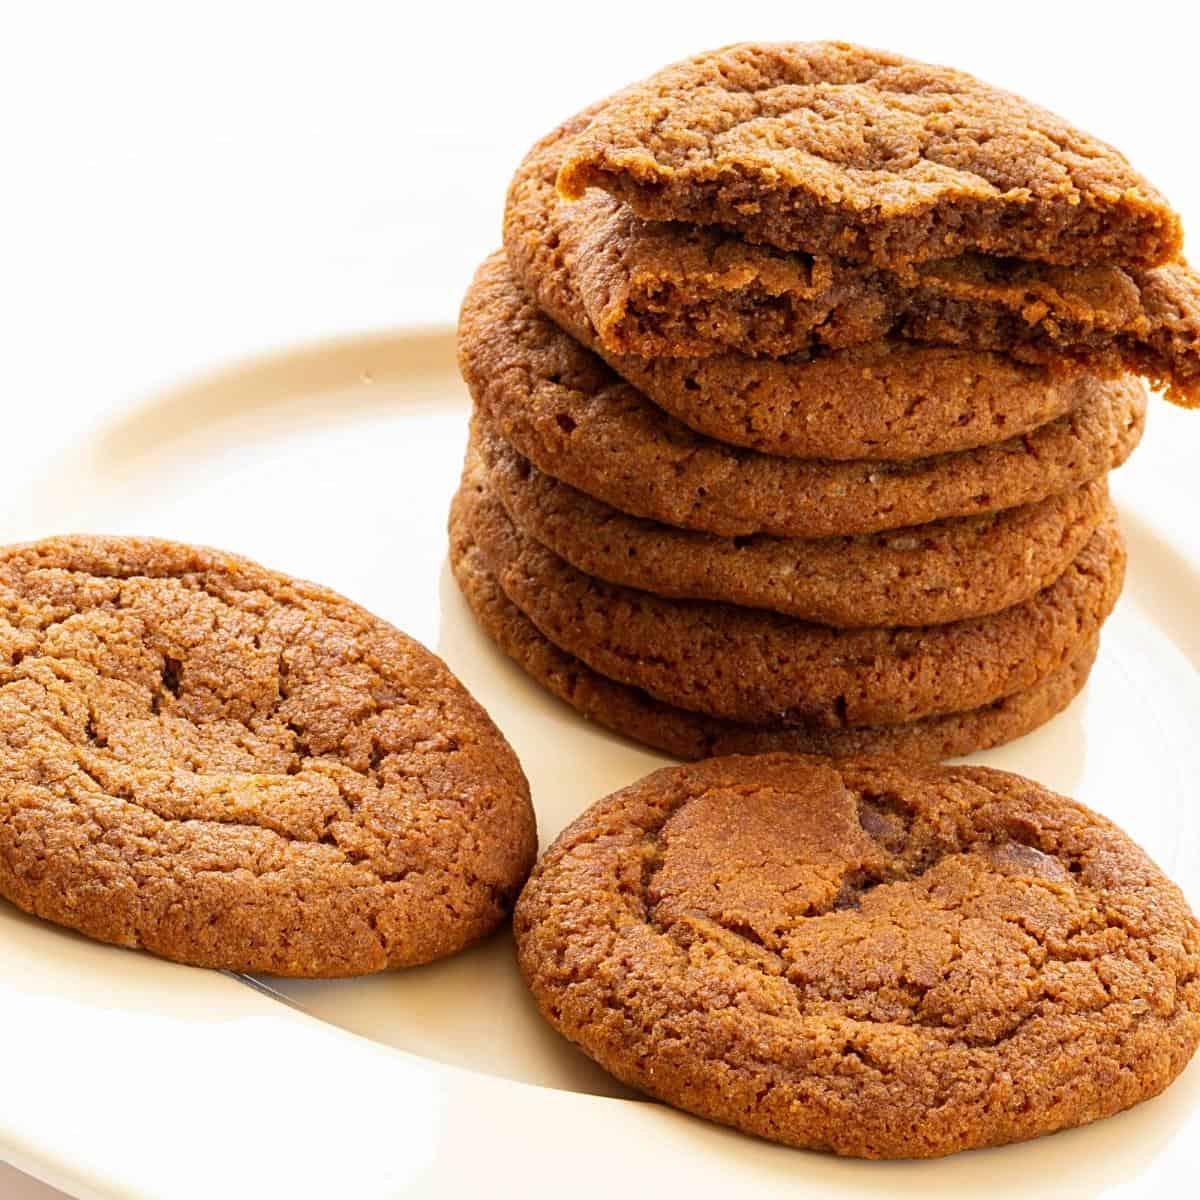 A stack of homemade cookies with ginger.